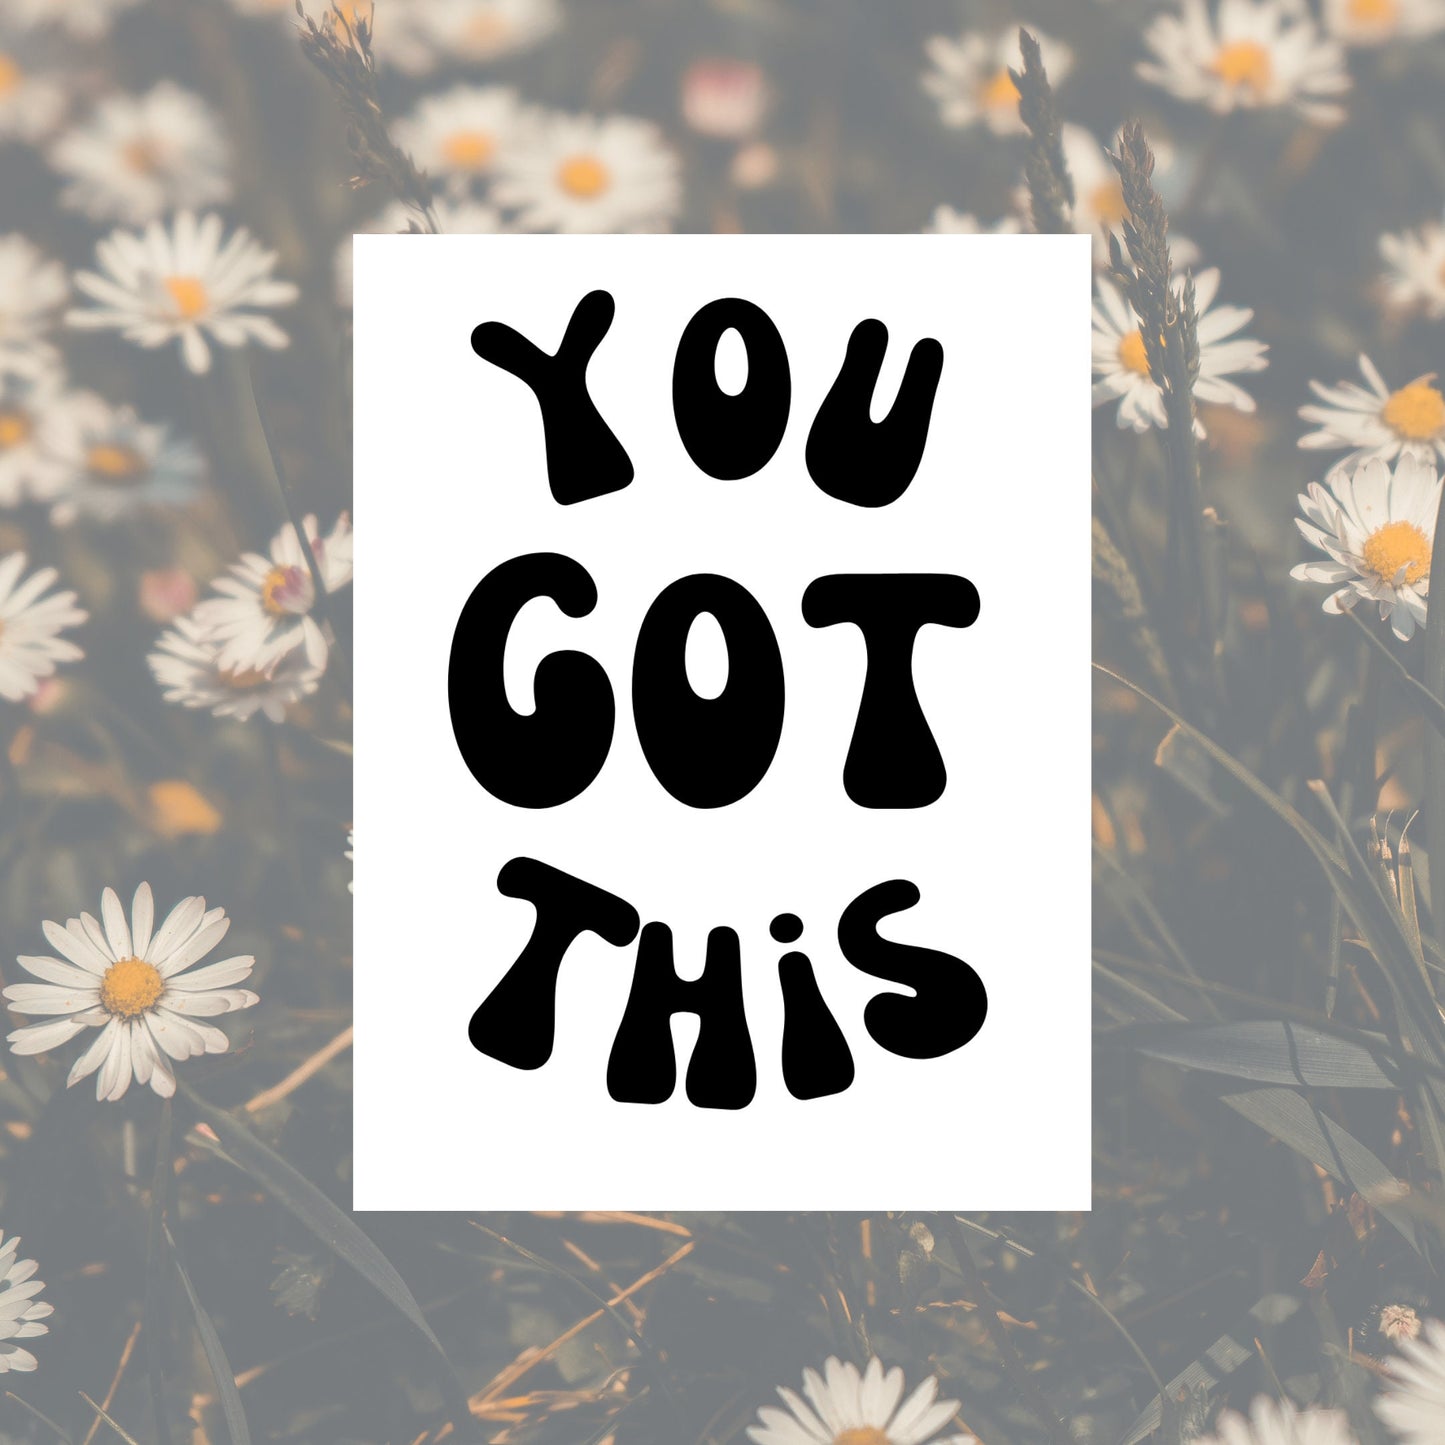 You Got This | Retro Decal | Mirror Affirmation Vinyl Decal